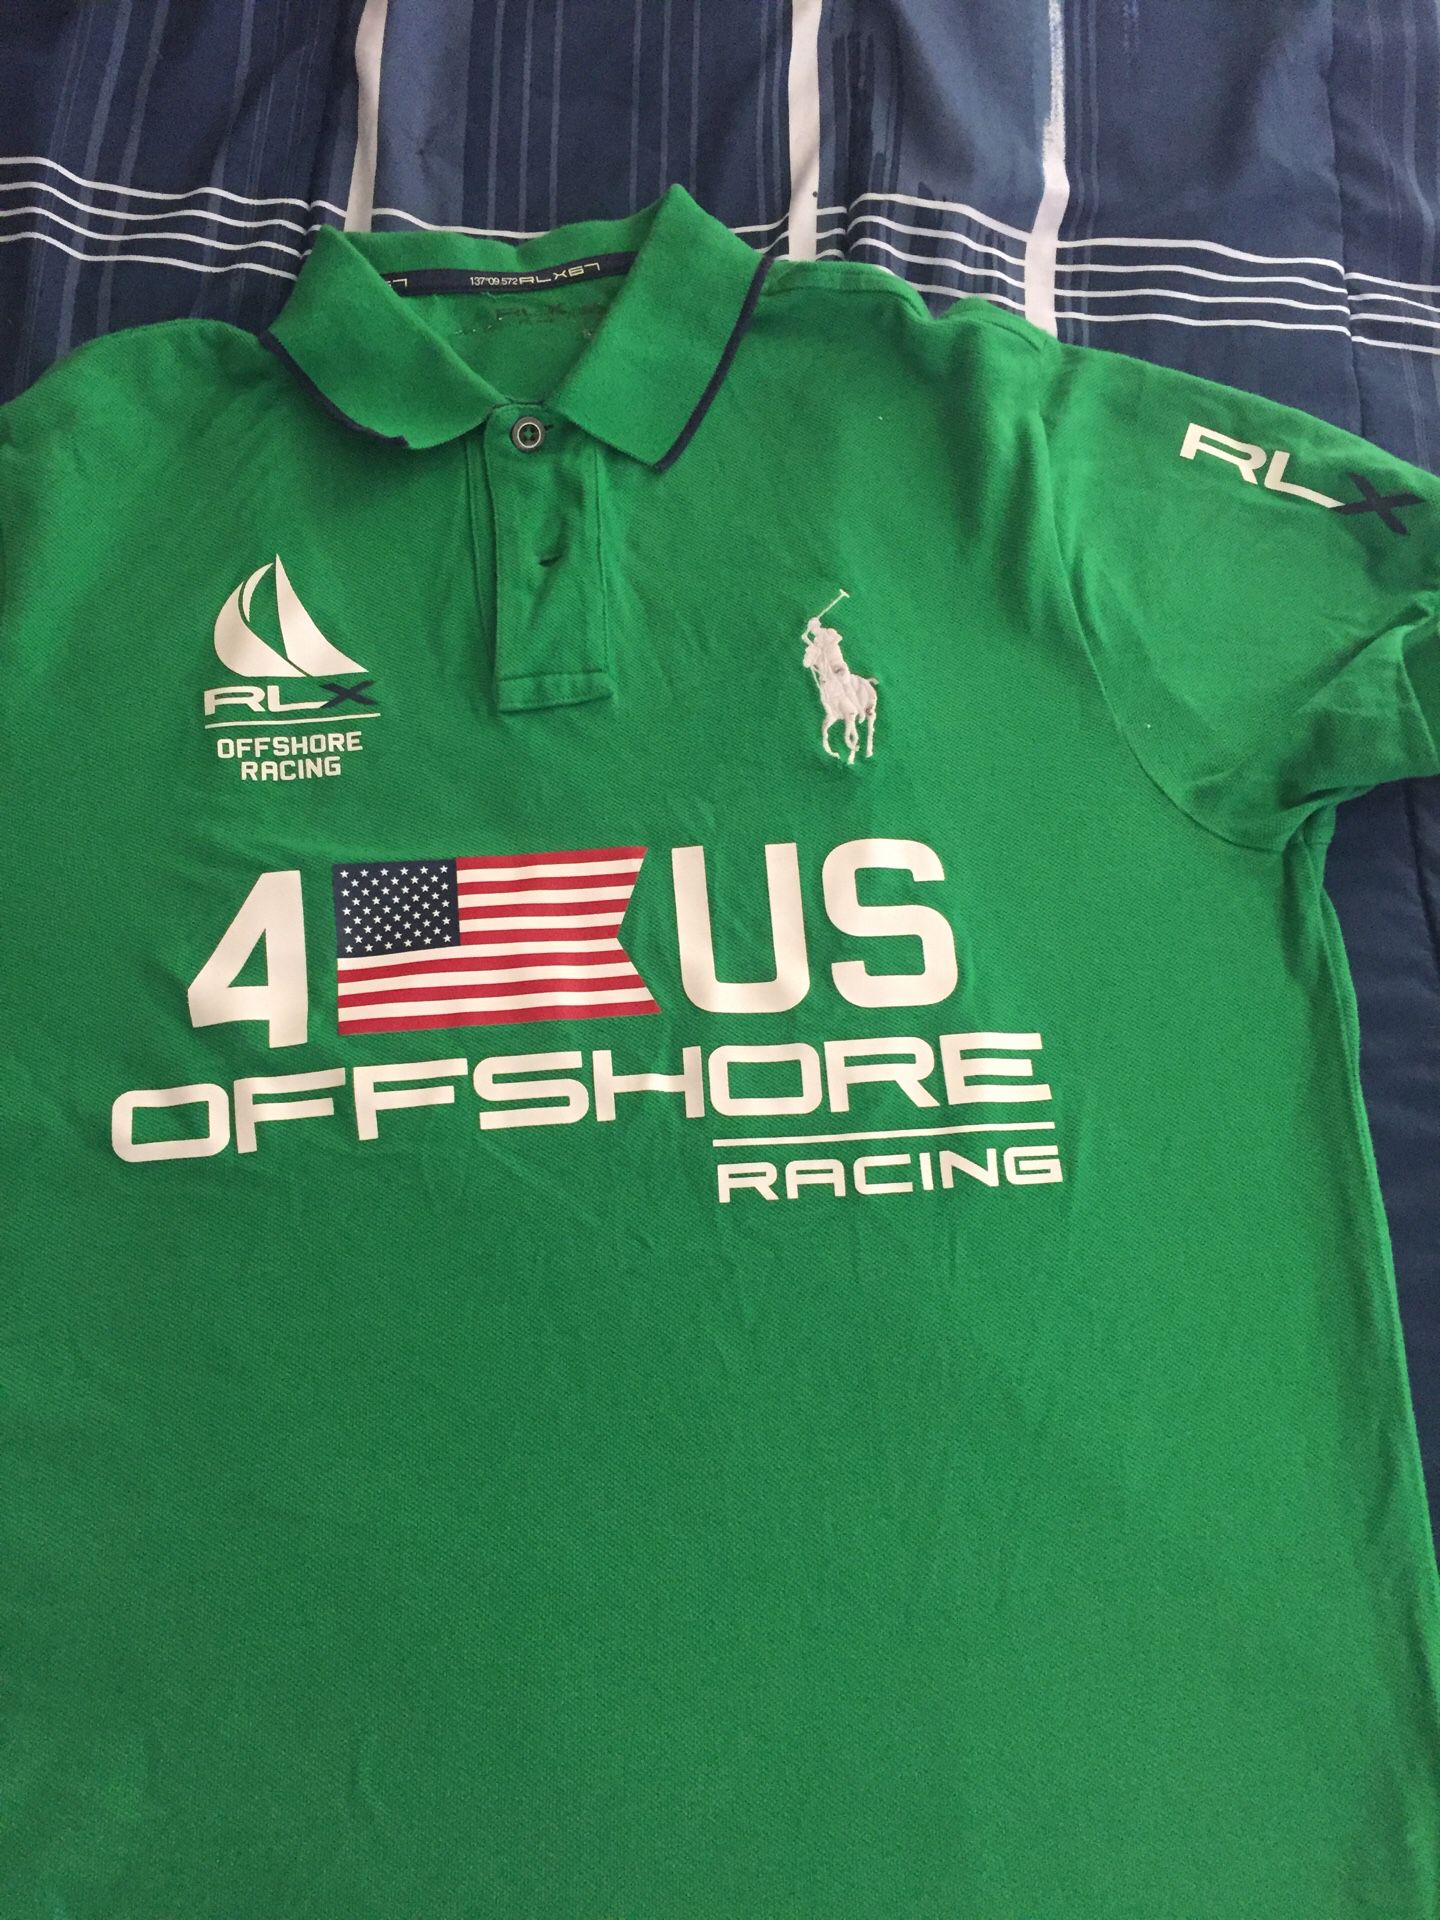 POLO RALPH LAUREN POLO SHIRT SIZE LARGE EXCELLENT CONDITION!!!FREE POLO SHIRT WITH PURCHASE